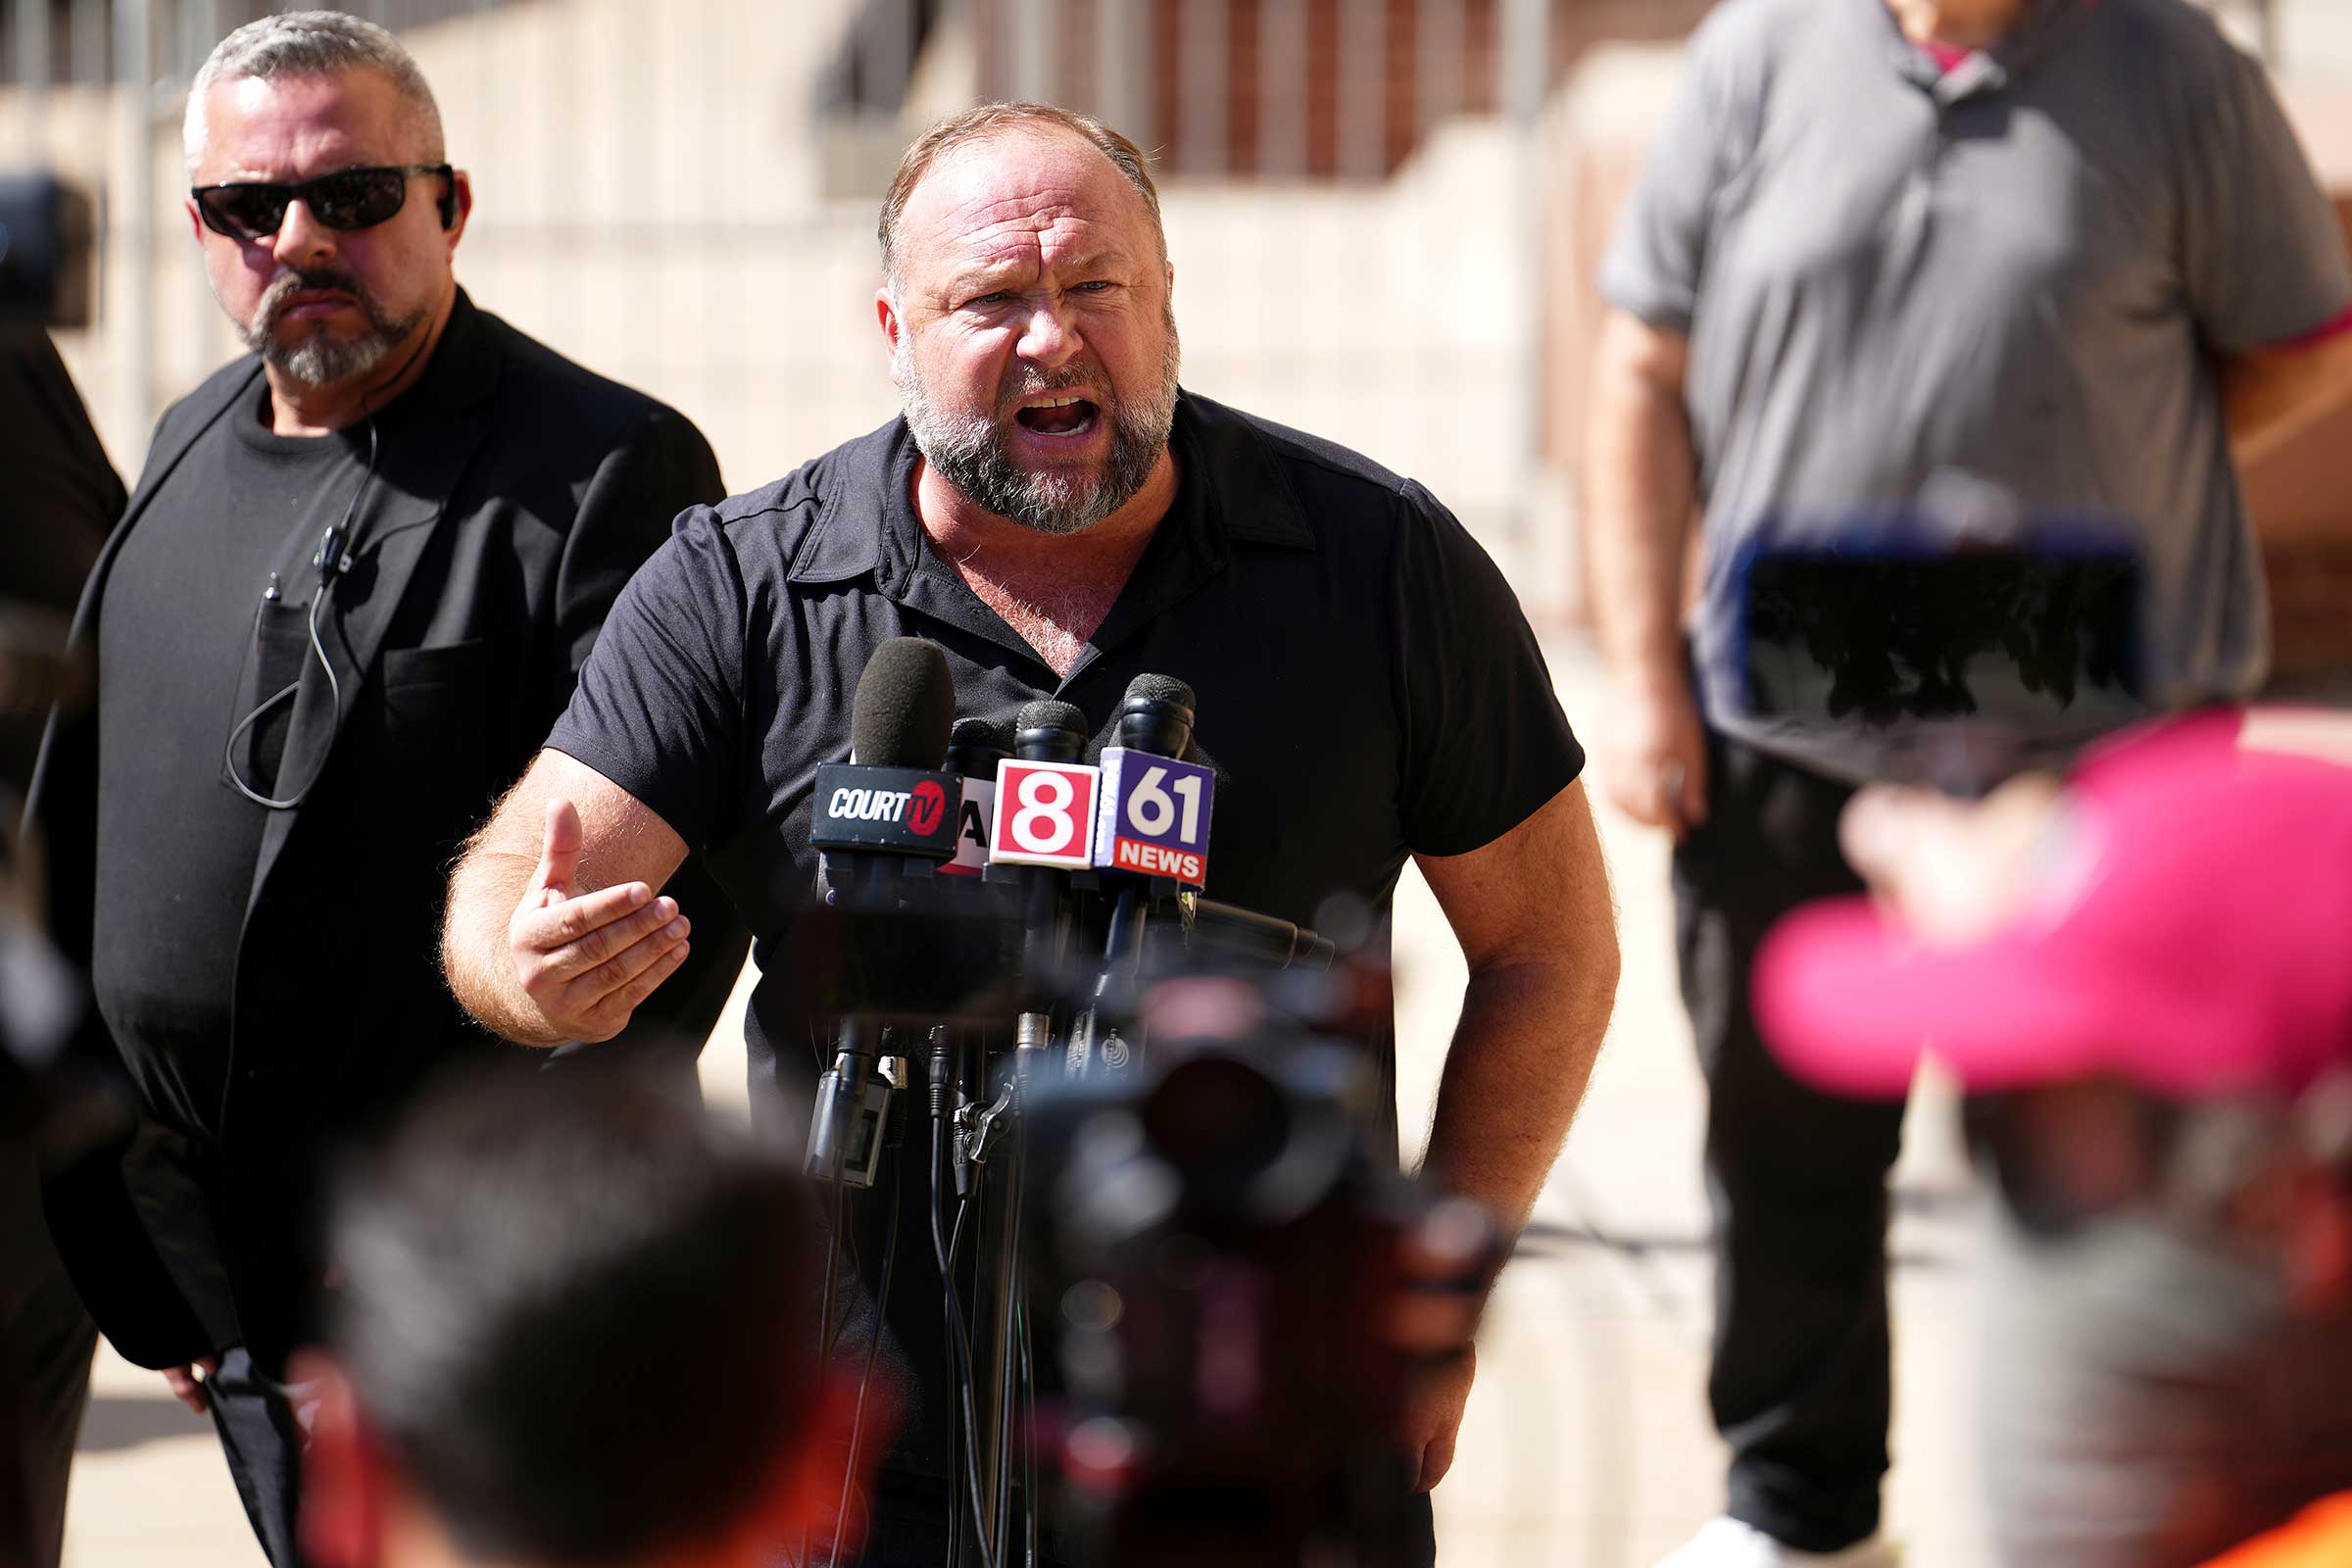 Alex Jones looking disgruntled while speaking into several microphones at a press conference outside